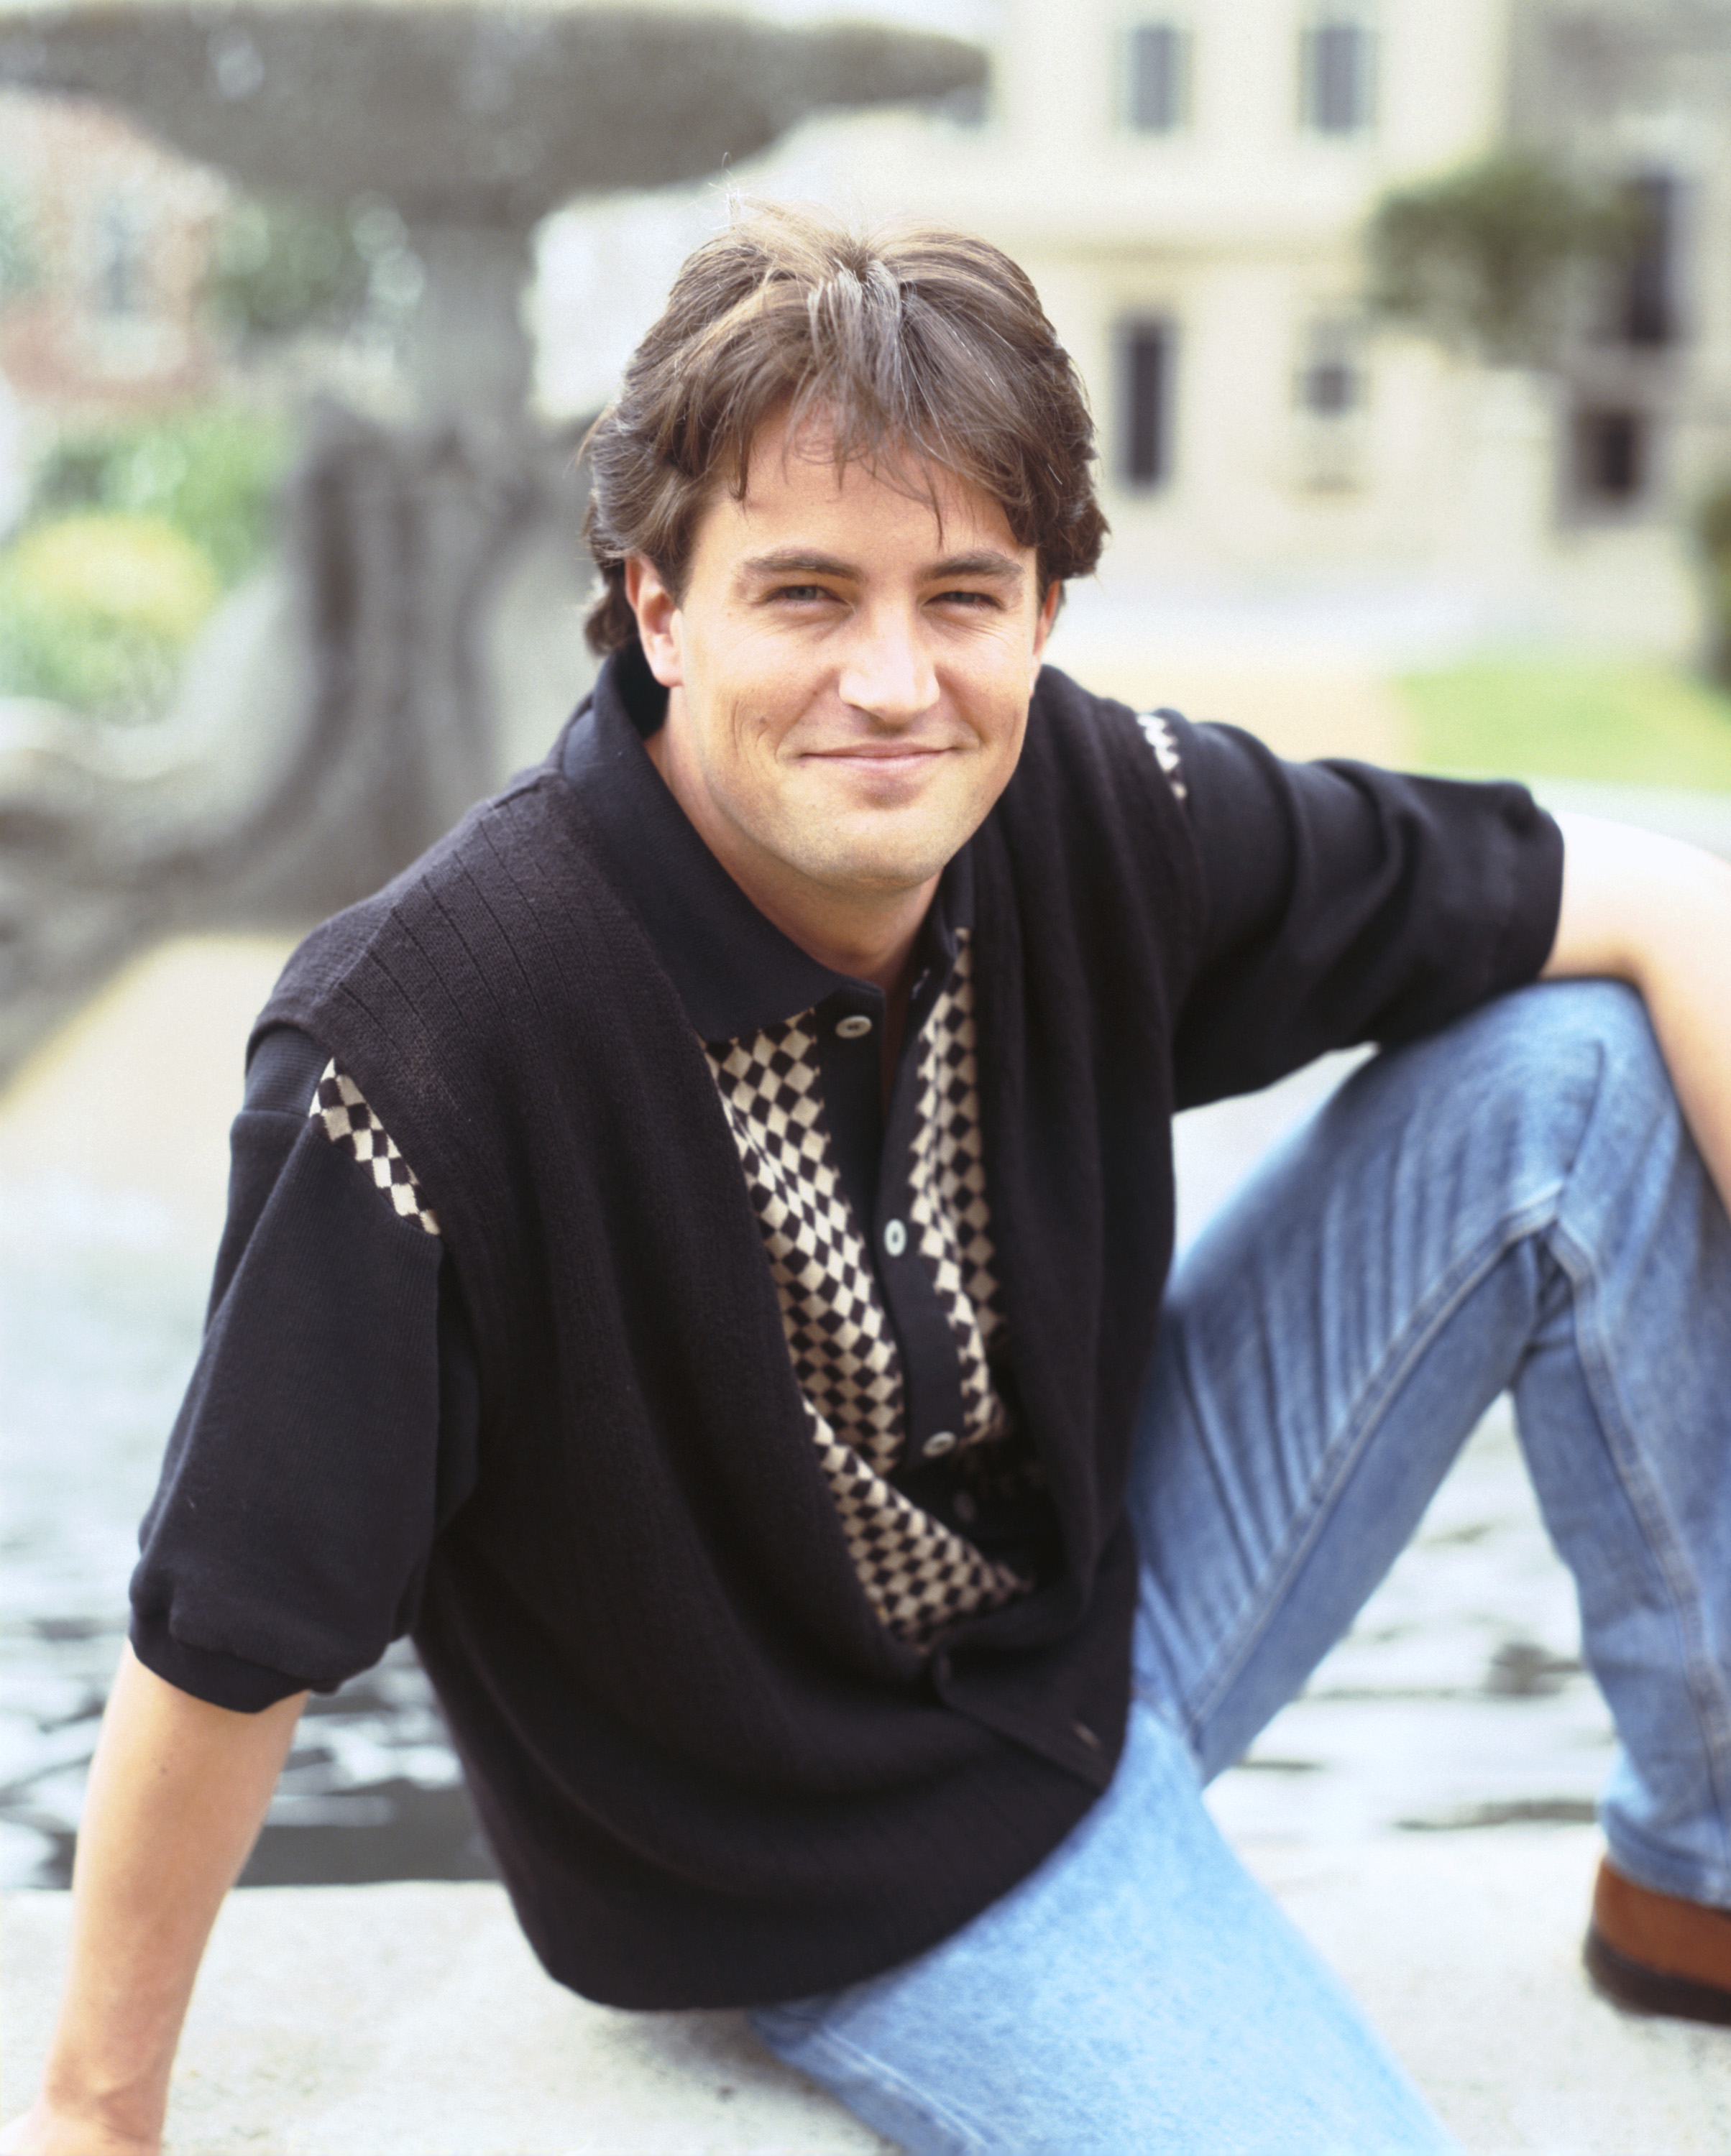 Close-up of a younger, smiling Matthew sitting down and wearing jeans, vest, and T-shirt